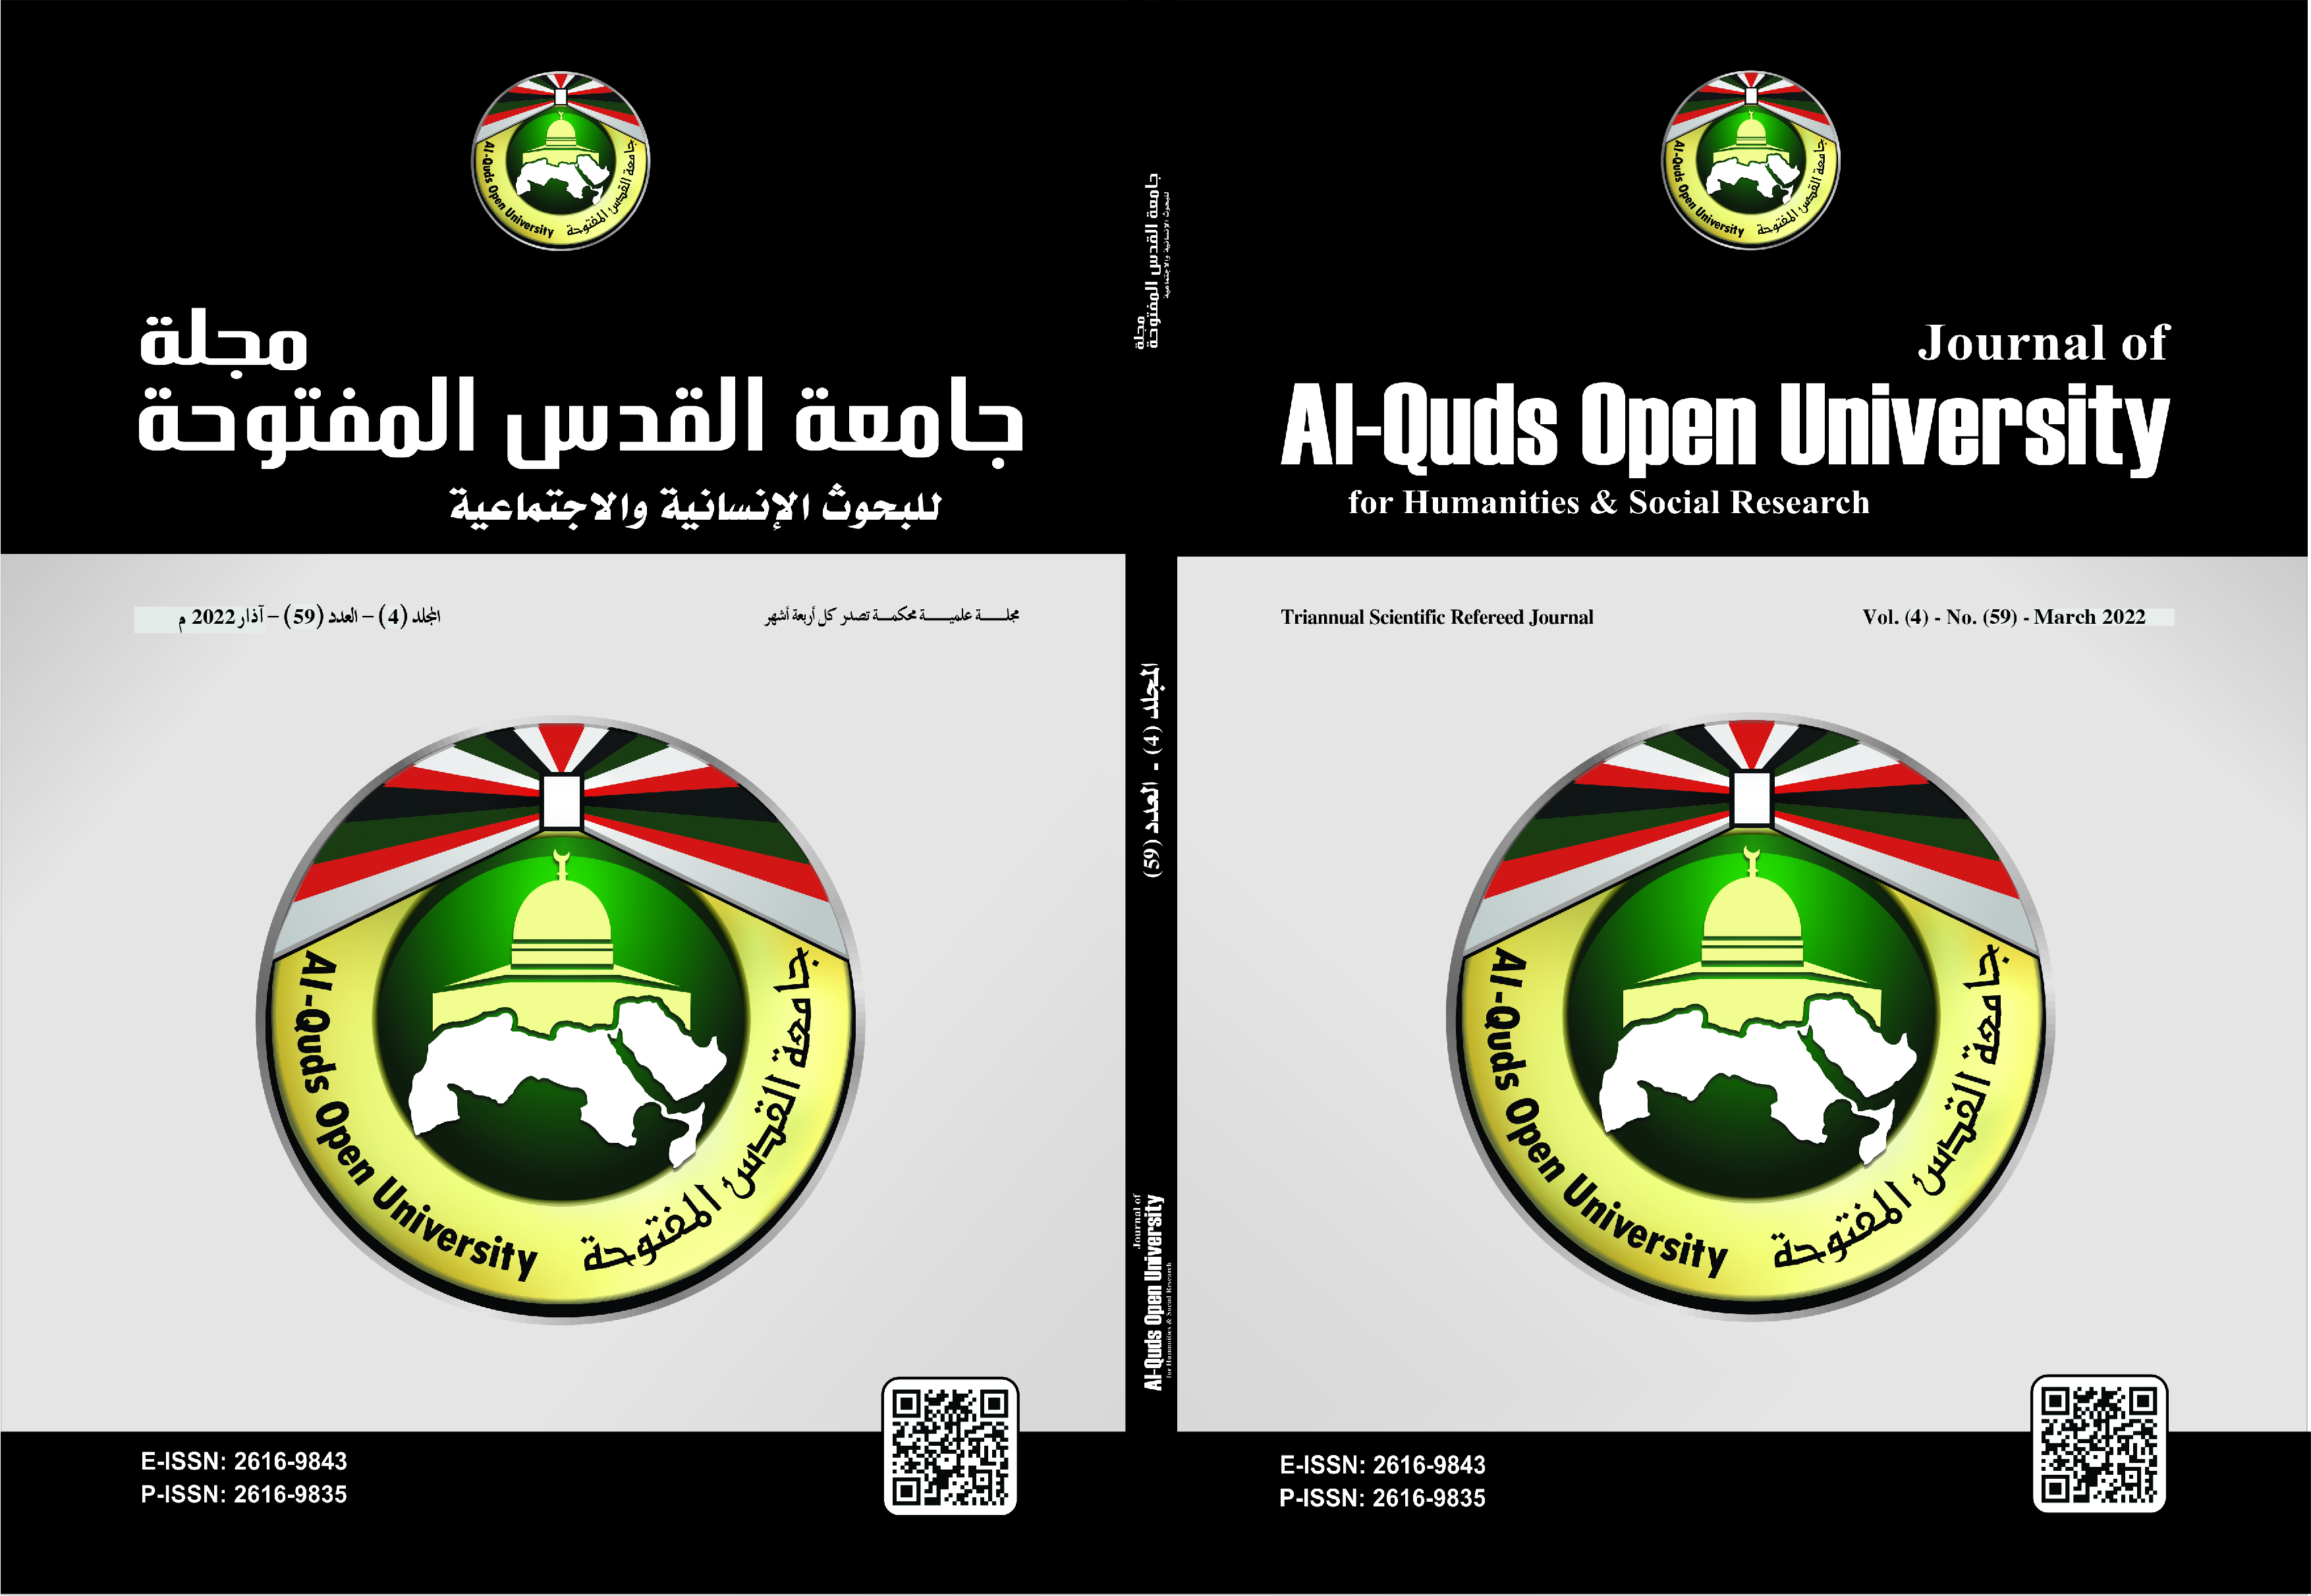 					View Vol. 4 No. 59 (2022): Journal of Al-Quds Open University for Humanities and Social Studies
				